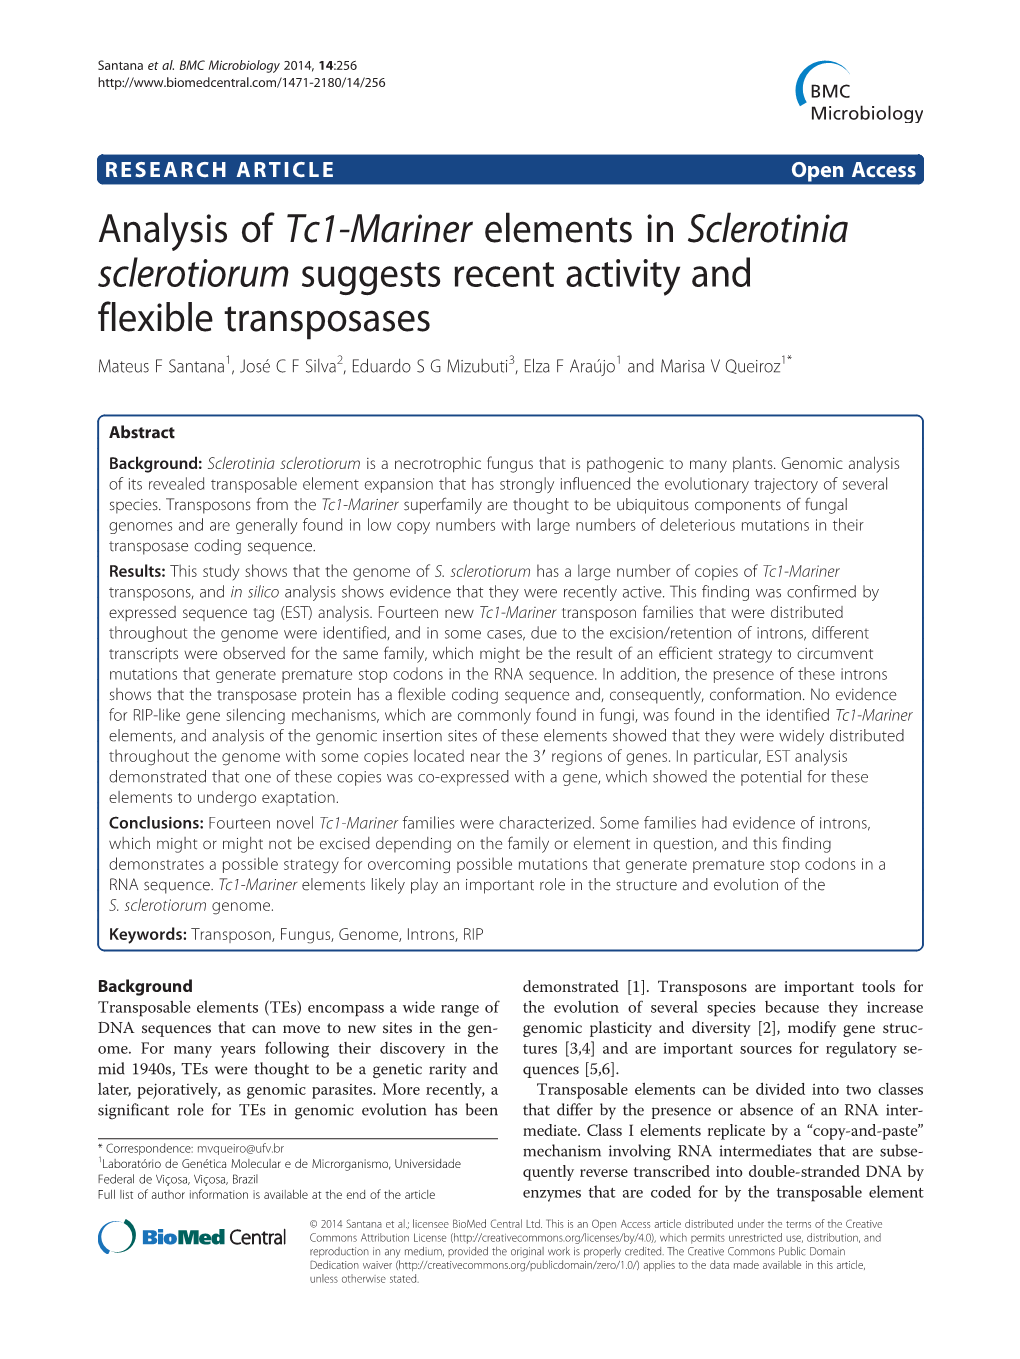 Analysis of Tc1-Mariner Elements in Sclerotinia Sclerotiorum Suggests Recent Activity and Flexible Transposases